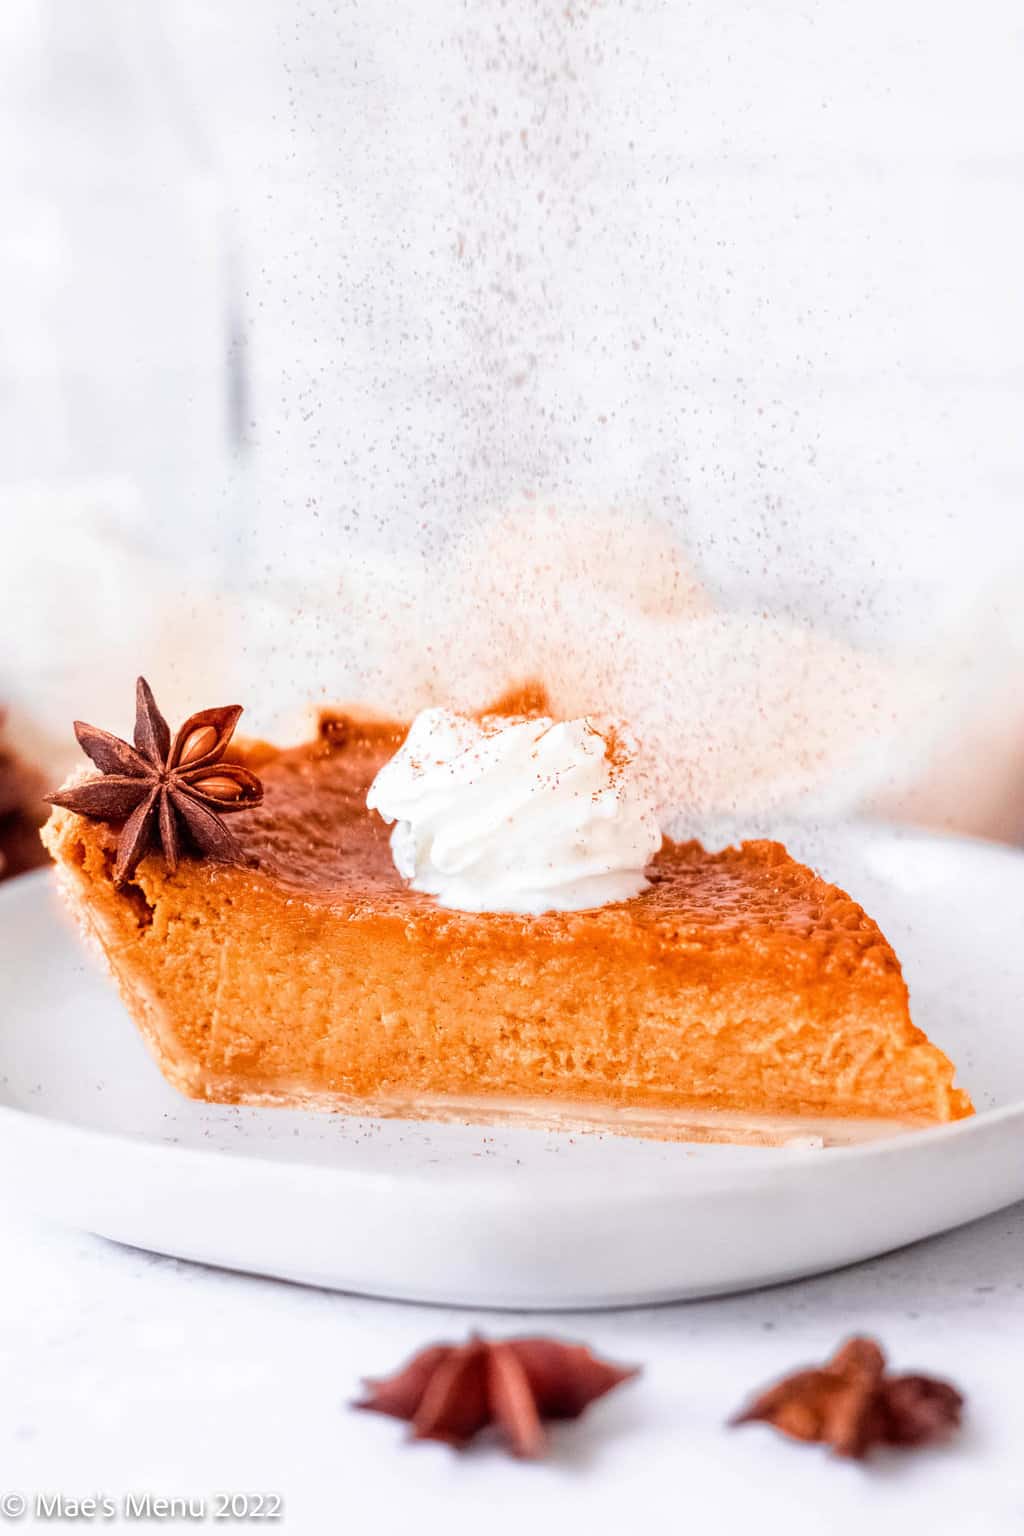 Dusting a piece of pumpkin pie with cinnamon.